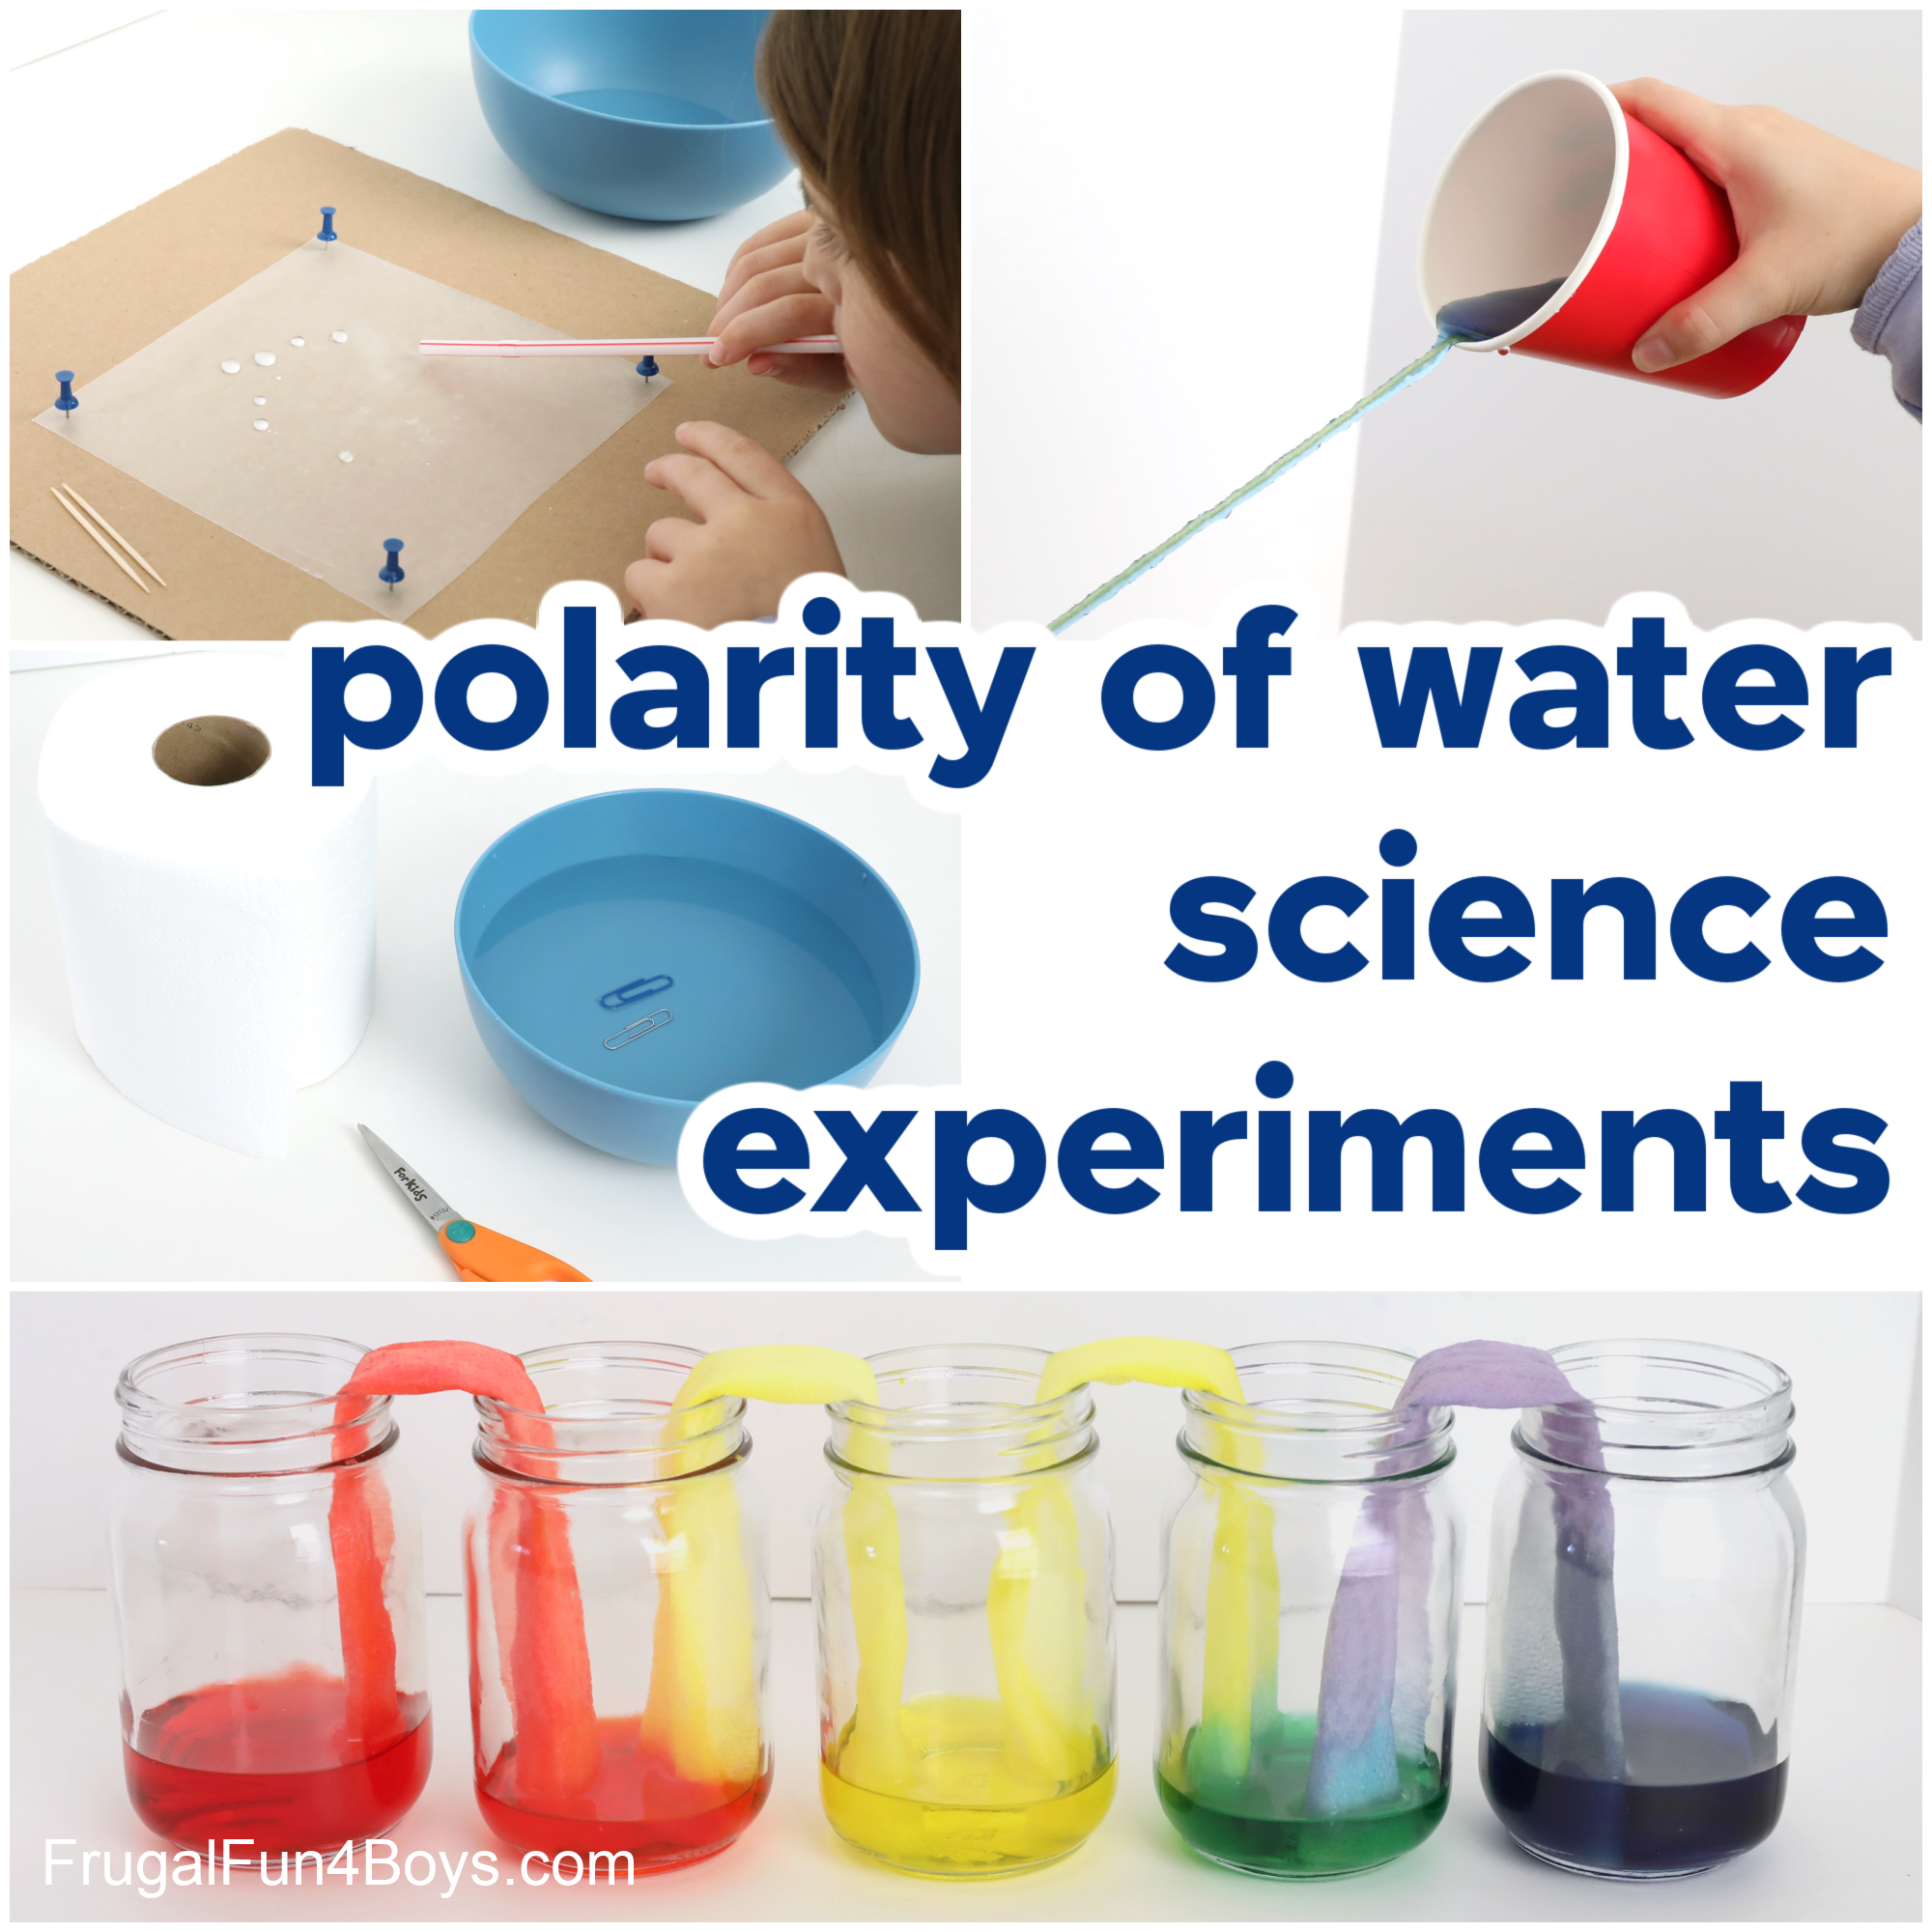 Polarity of Water Science Experiments